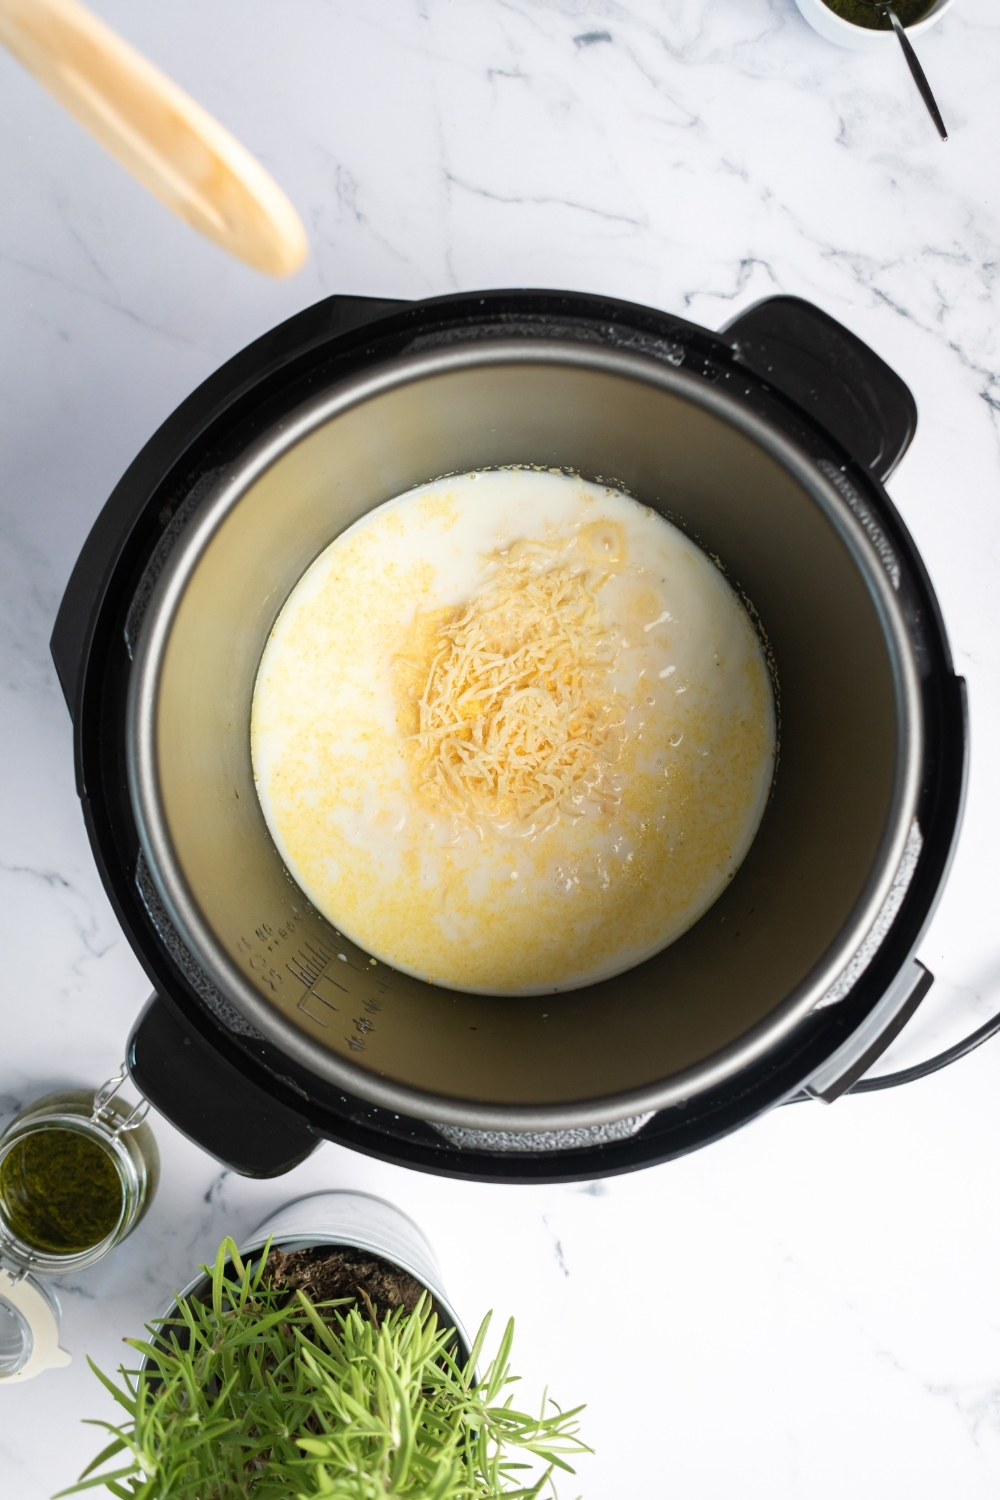 An instant pot filled with creamy polenta ingredients.